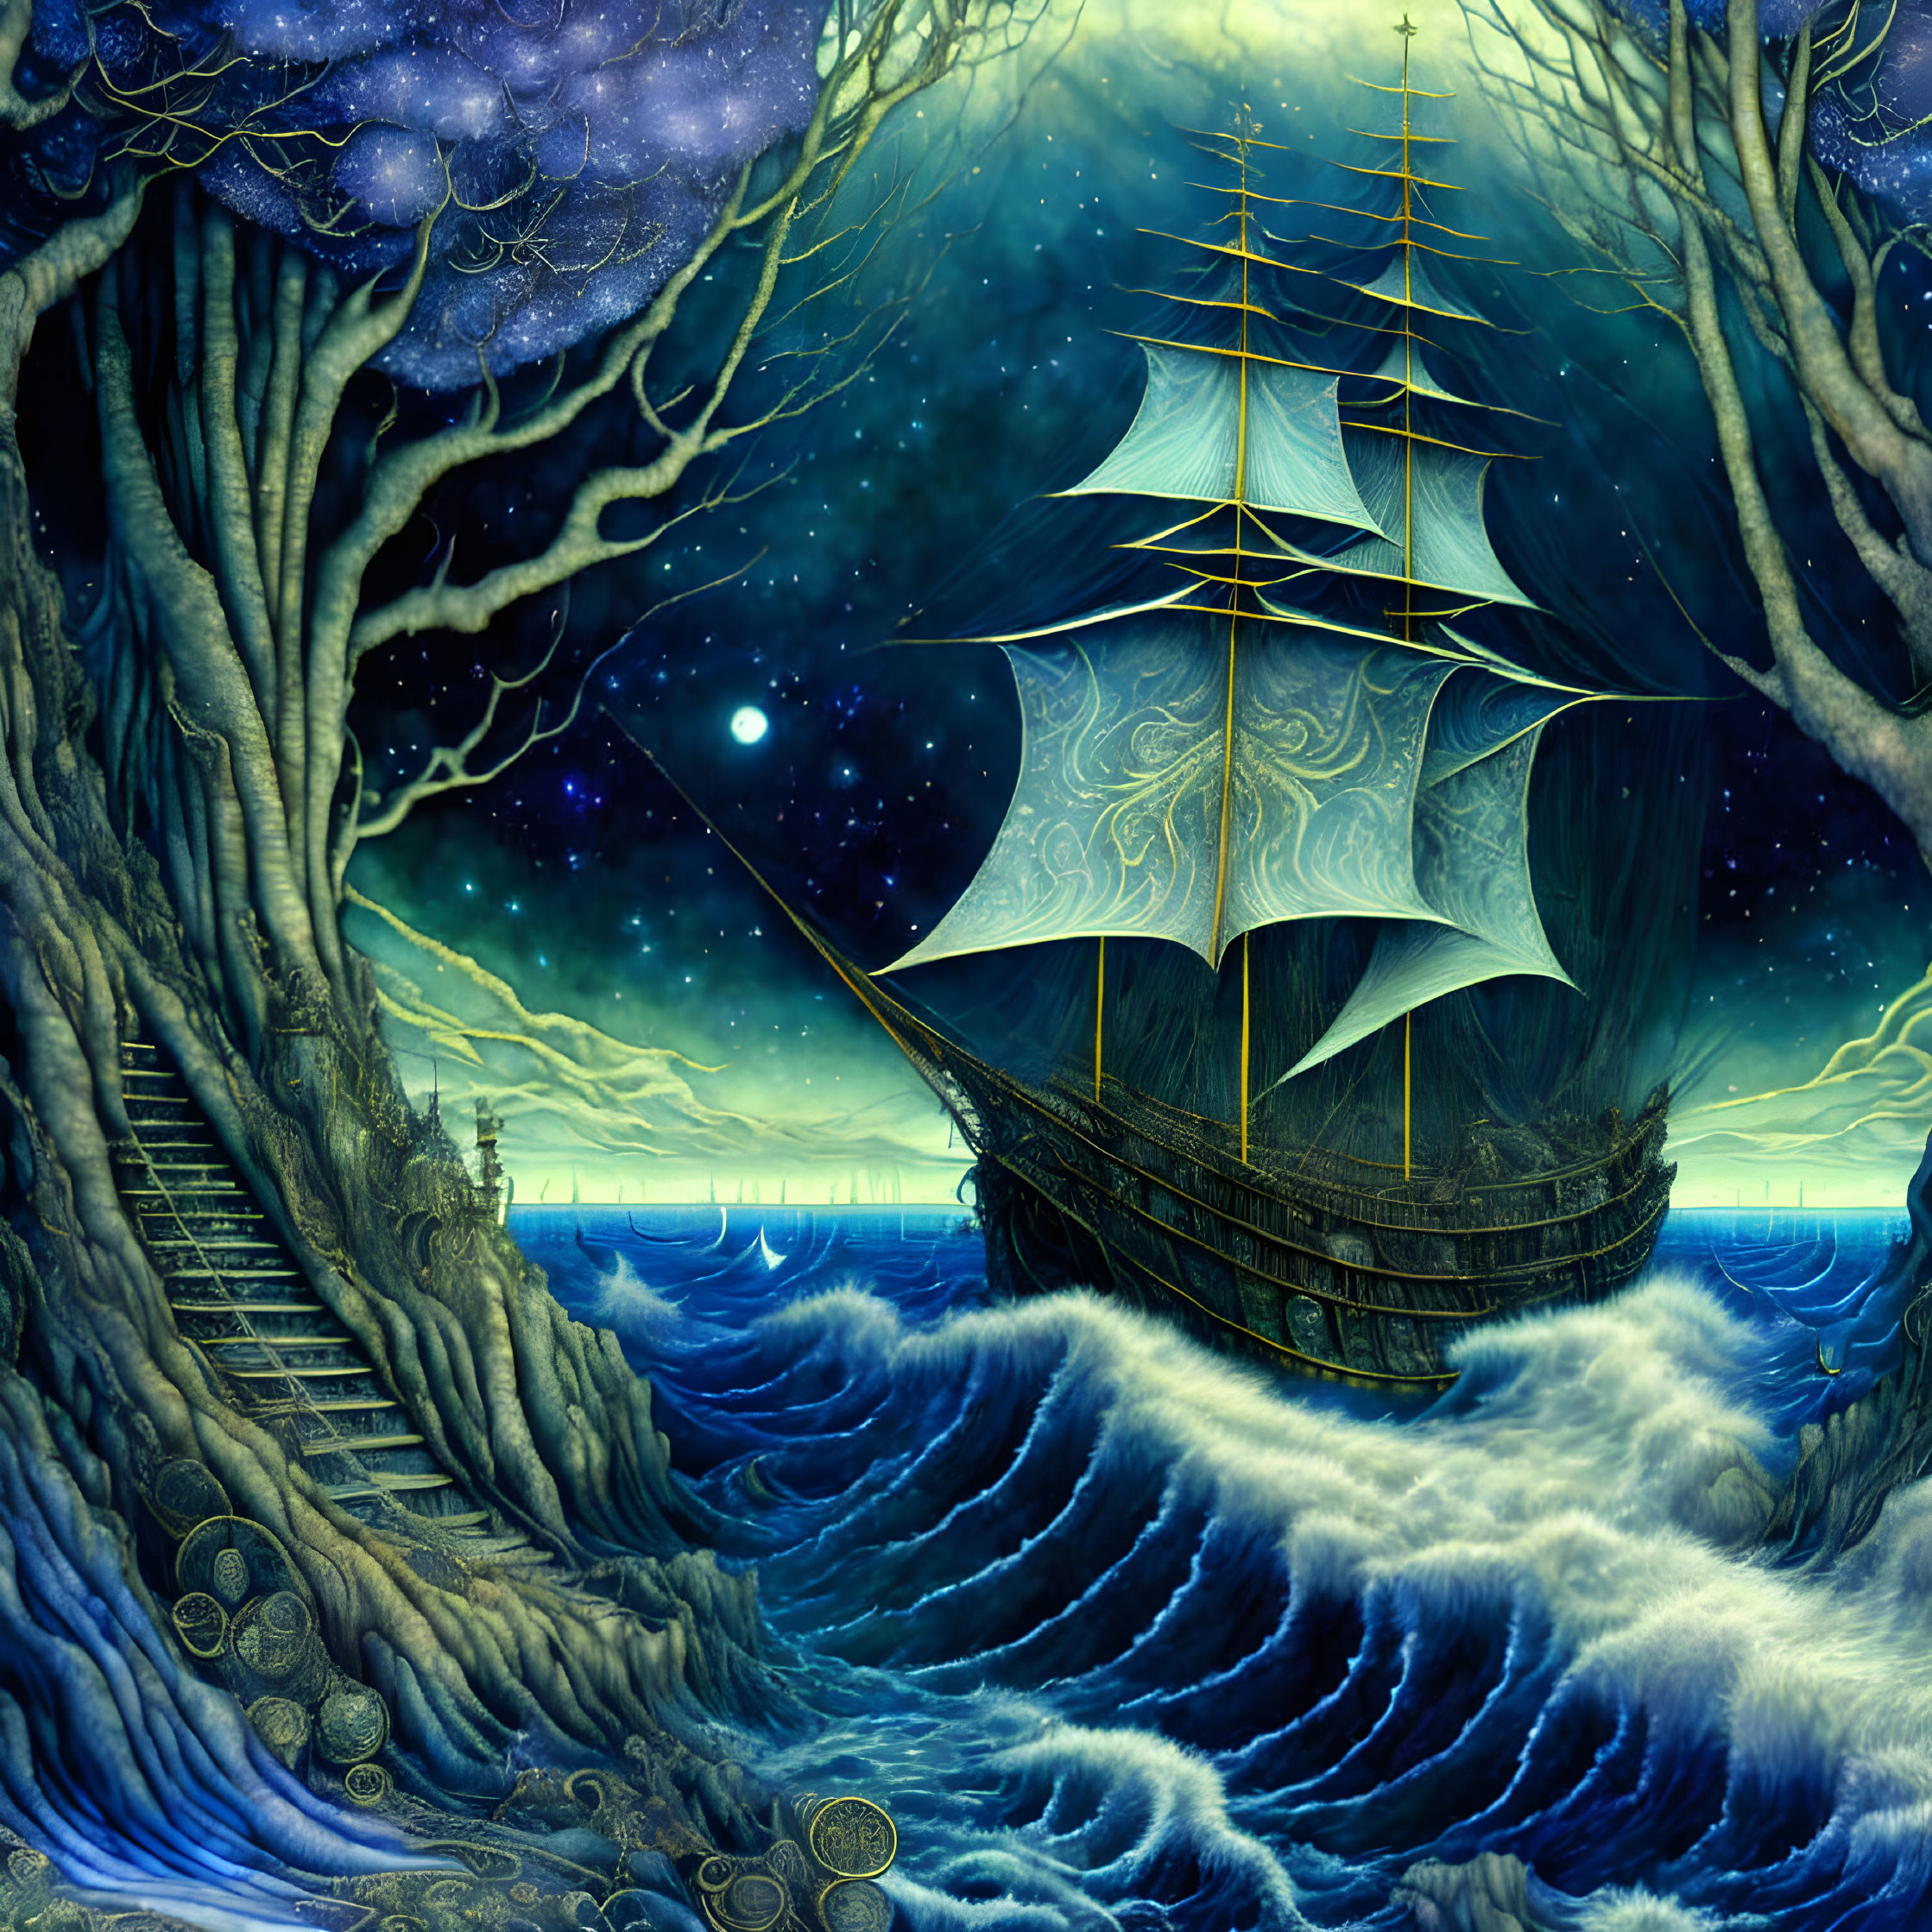 Majestic sailing ship on starry night sea with ancient trees and mystical staircase